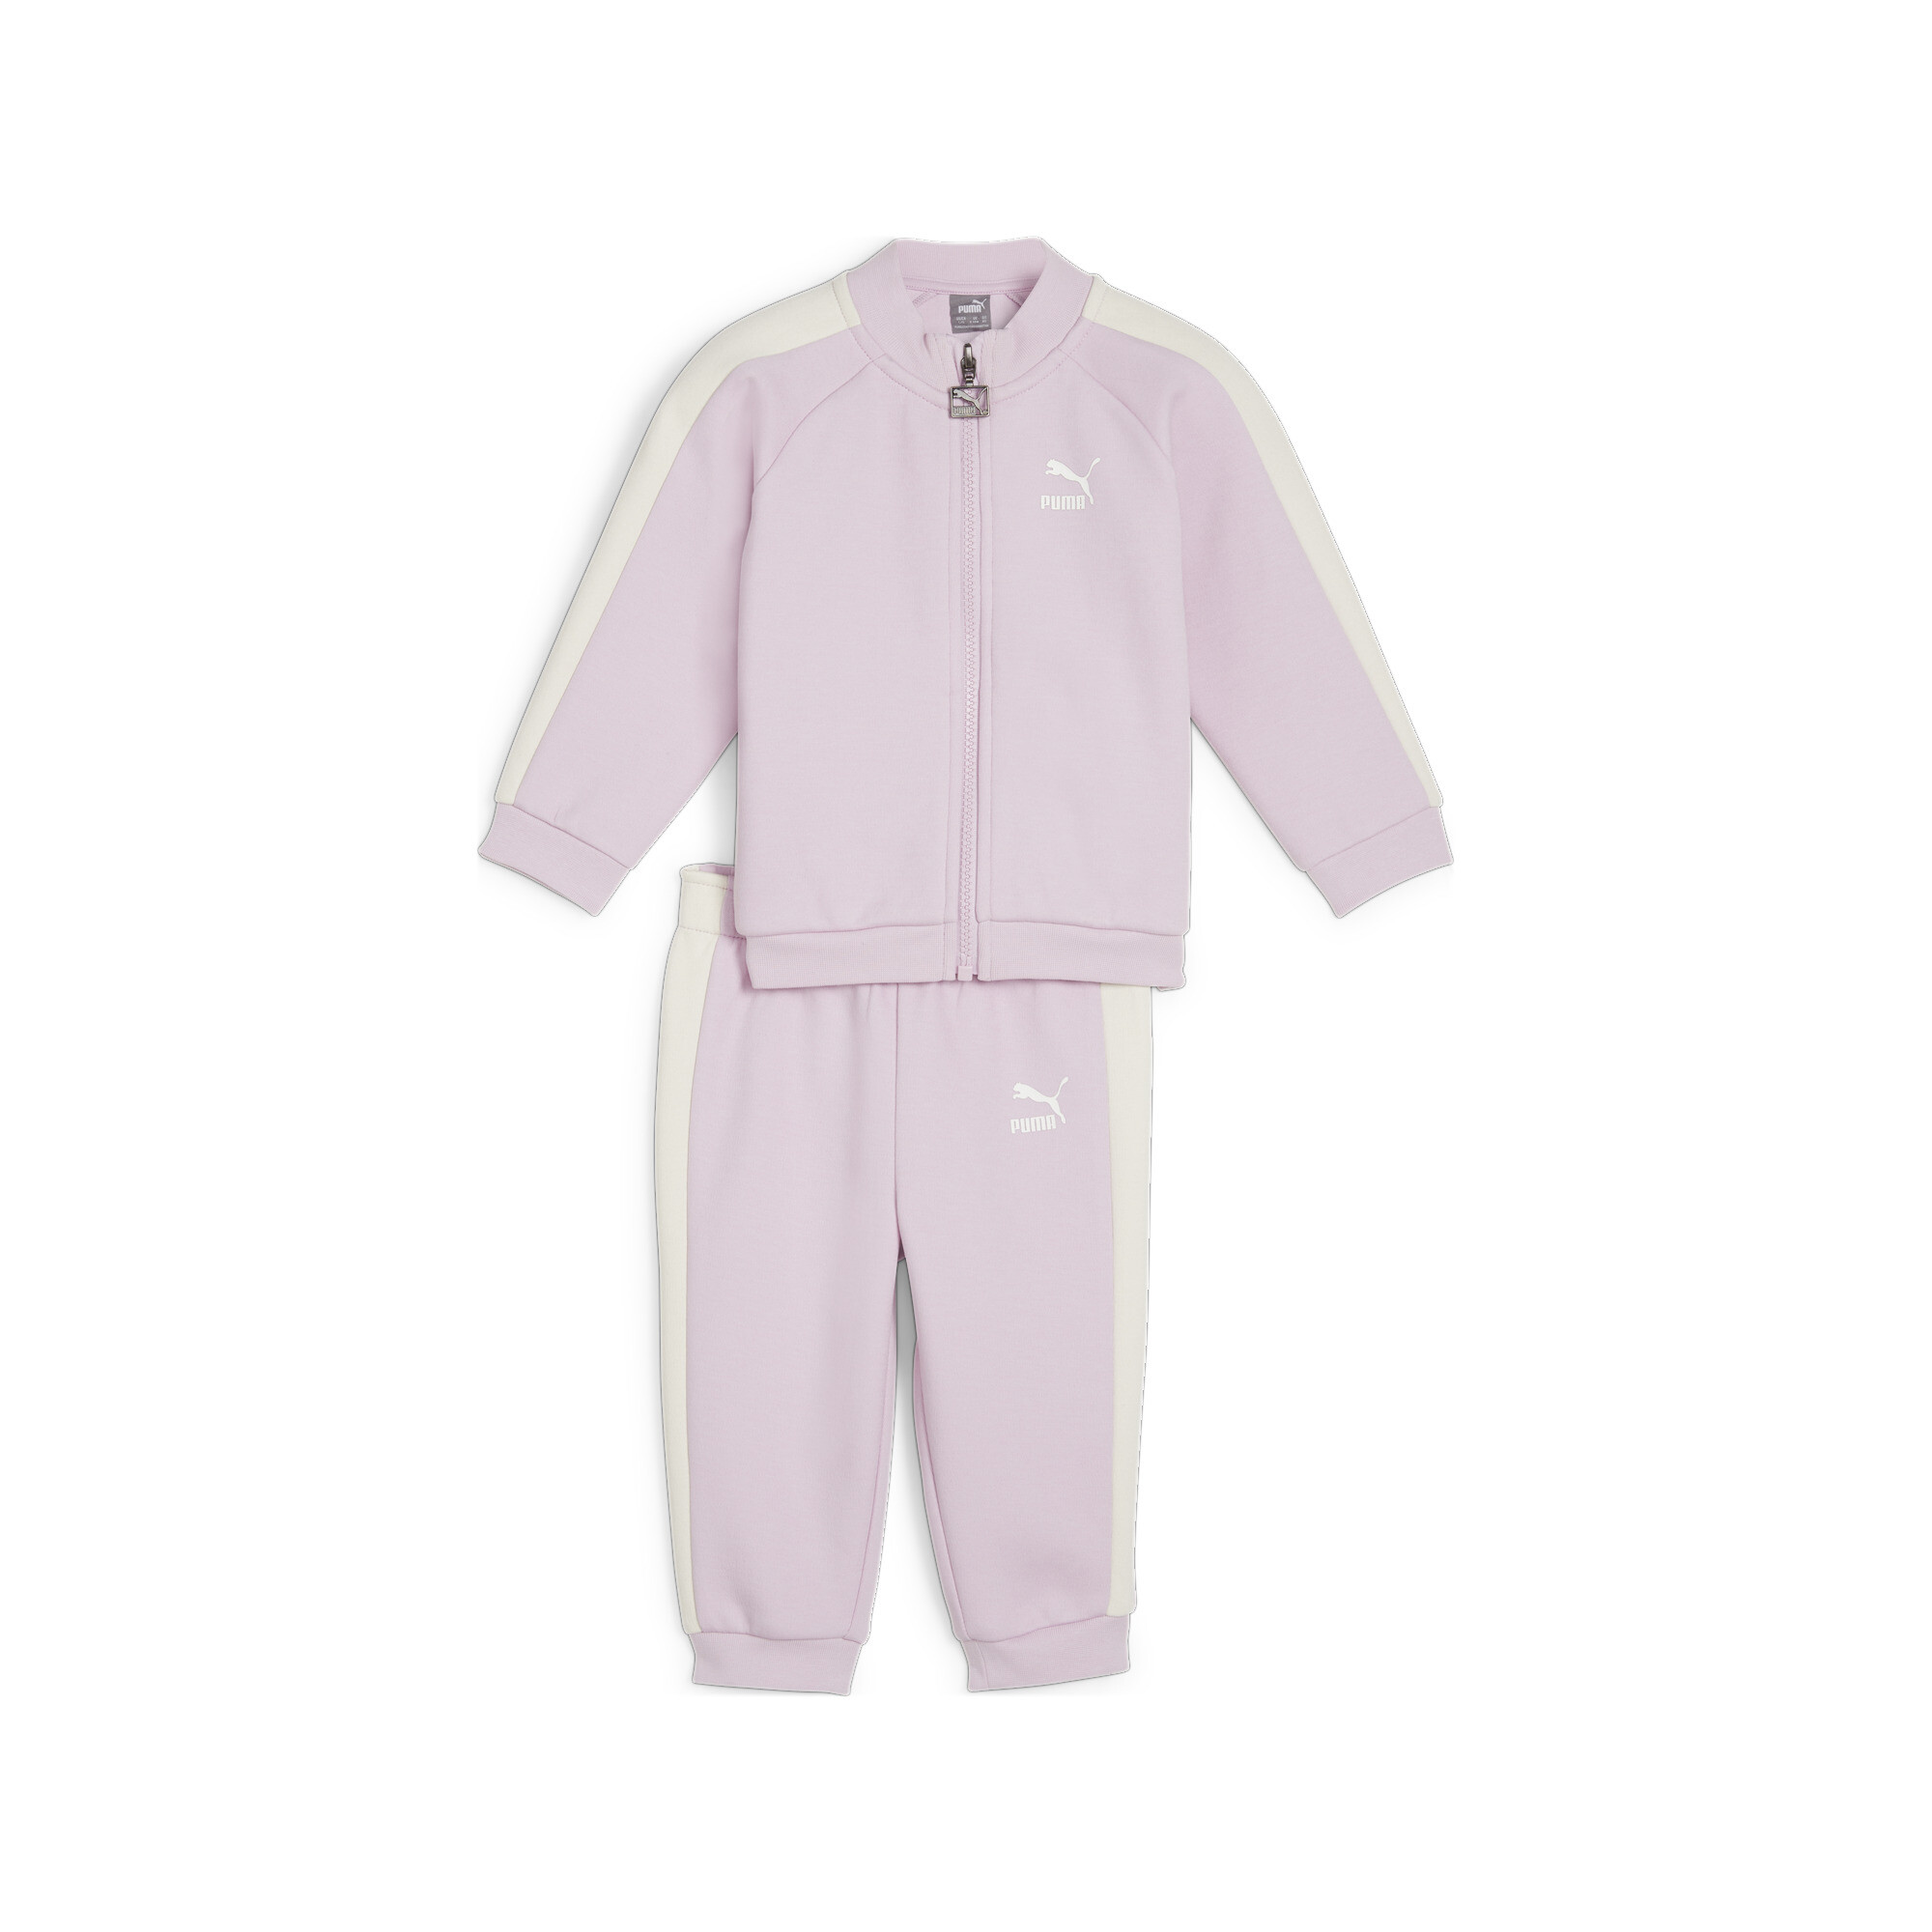 PUMA MINICATS T7 ICONIC Baby Tracksuit Set In Purple, Size 3-4 Youth